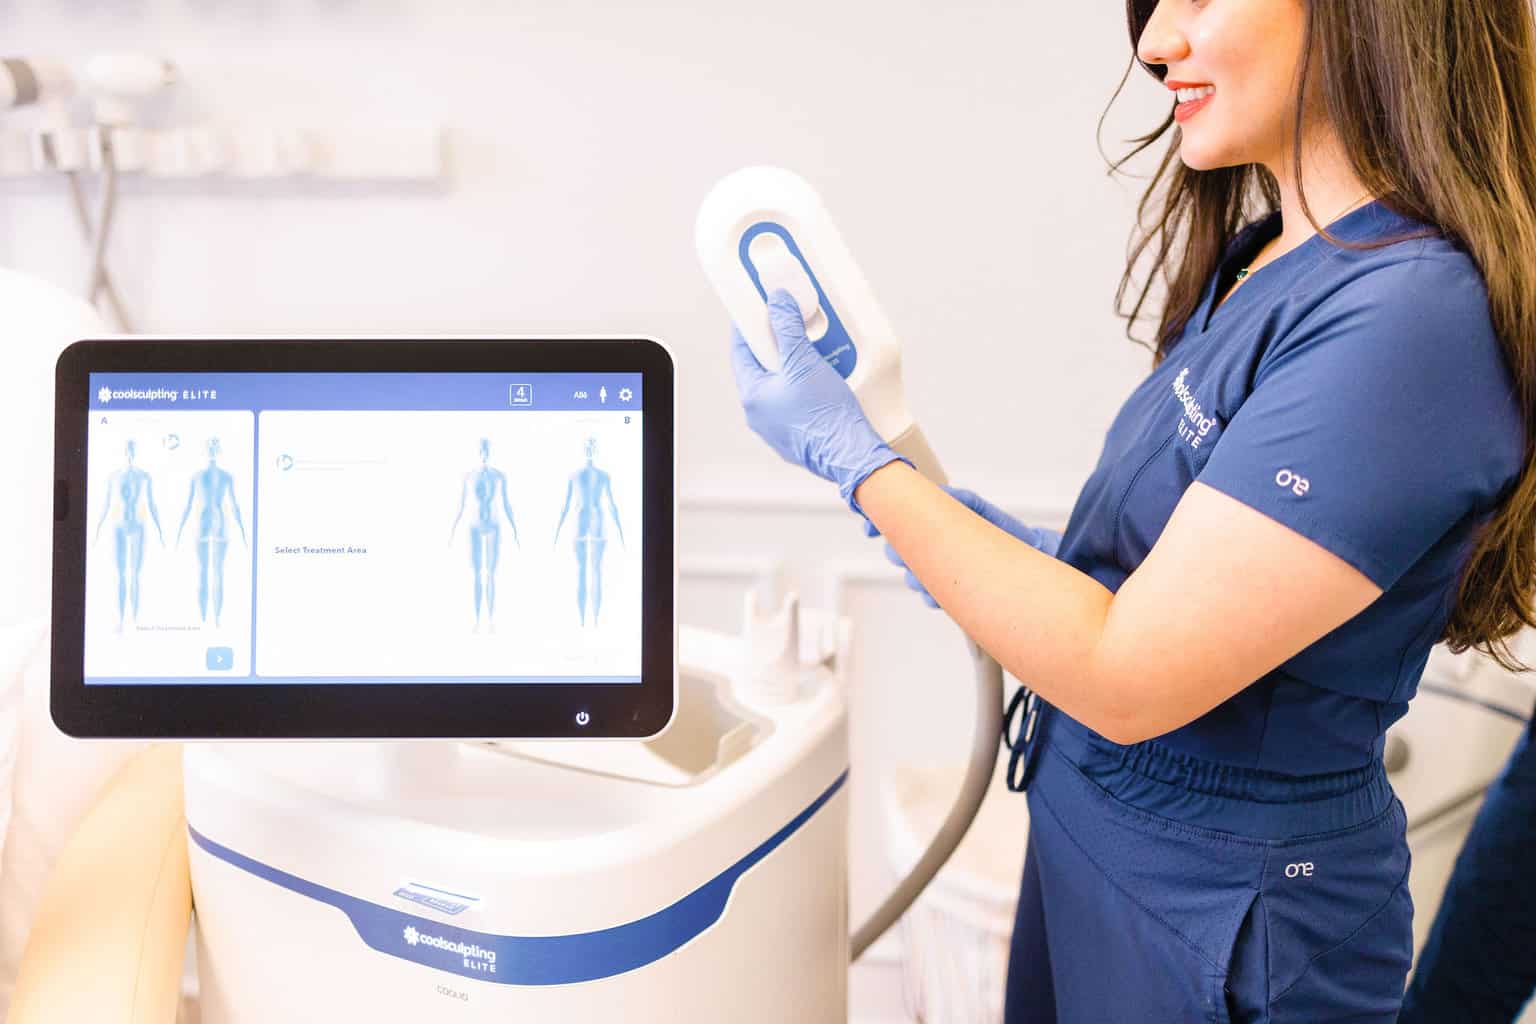 Coolsculpting speclialist about to perform coolsculpting procedure